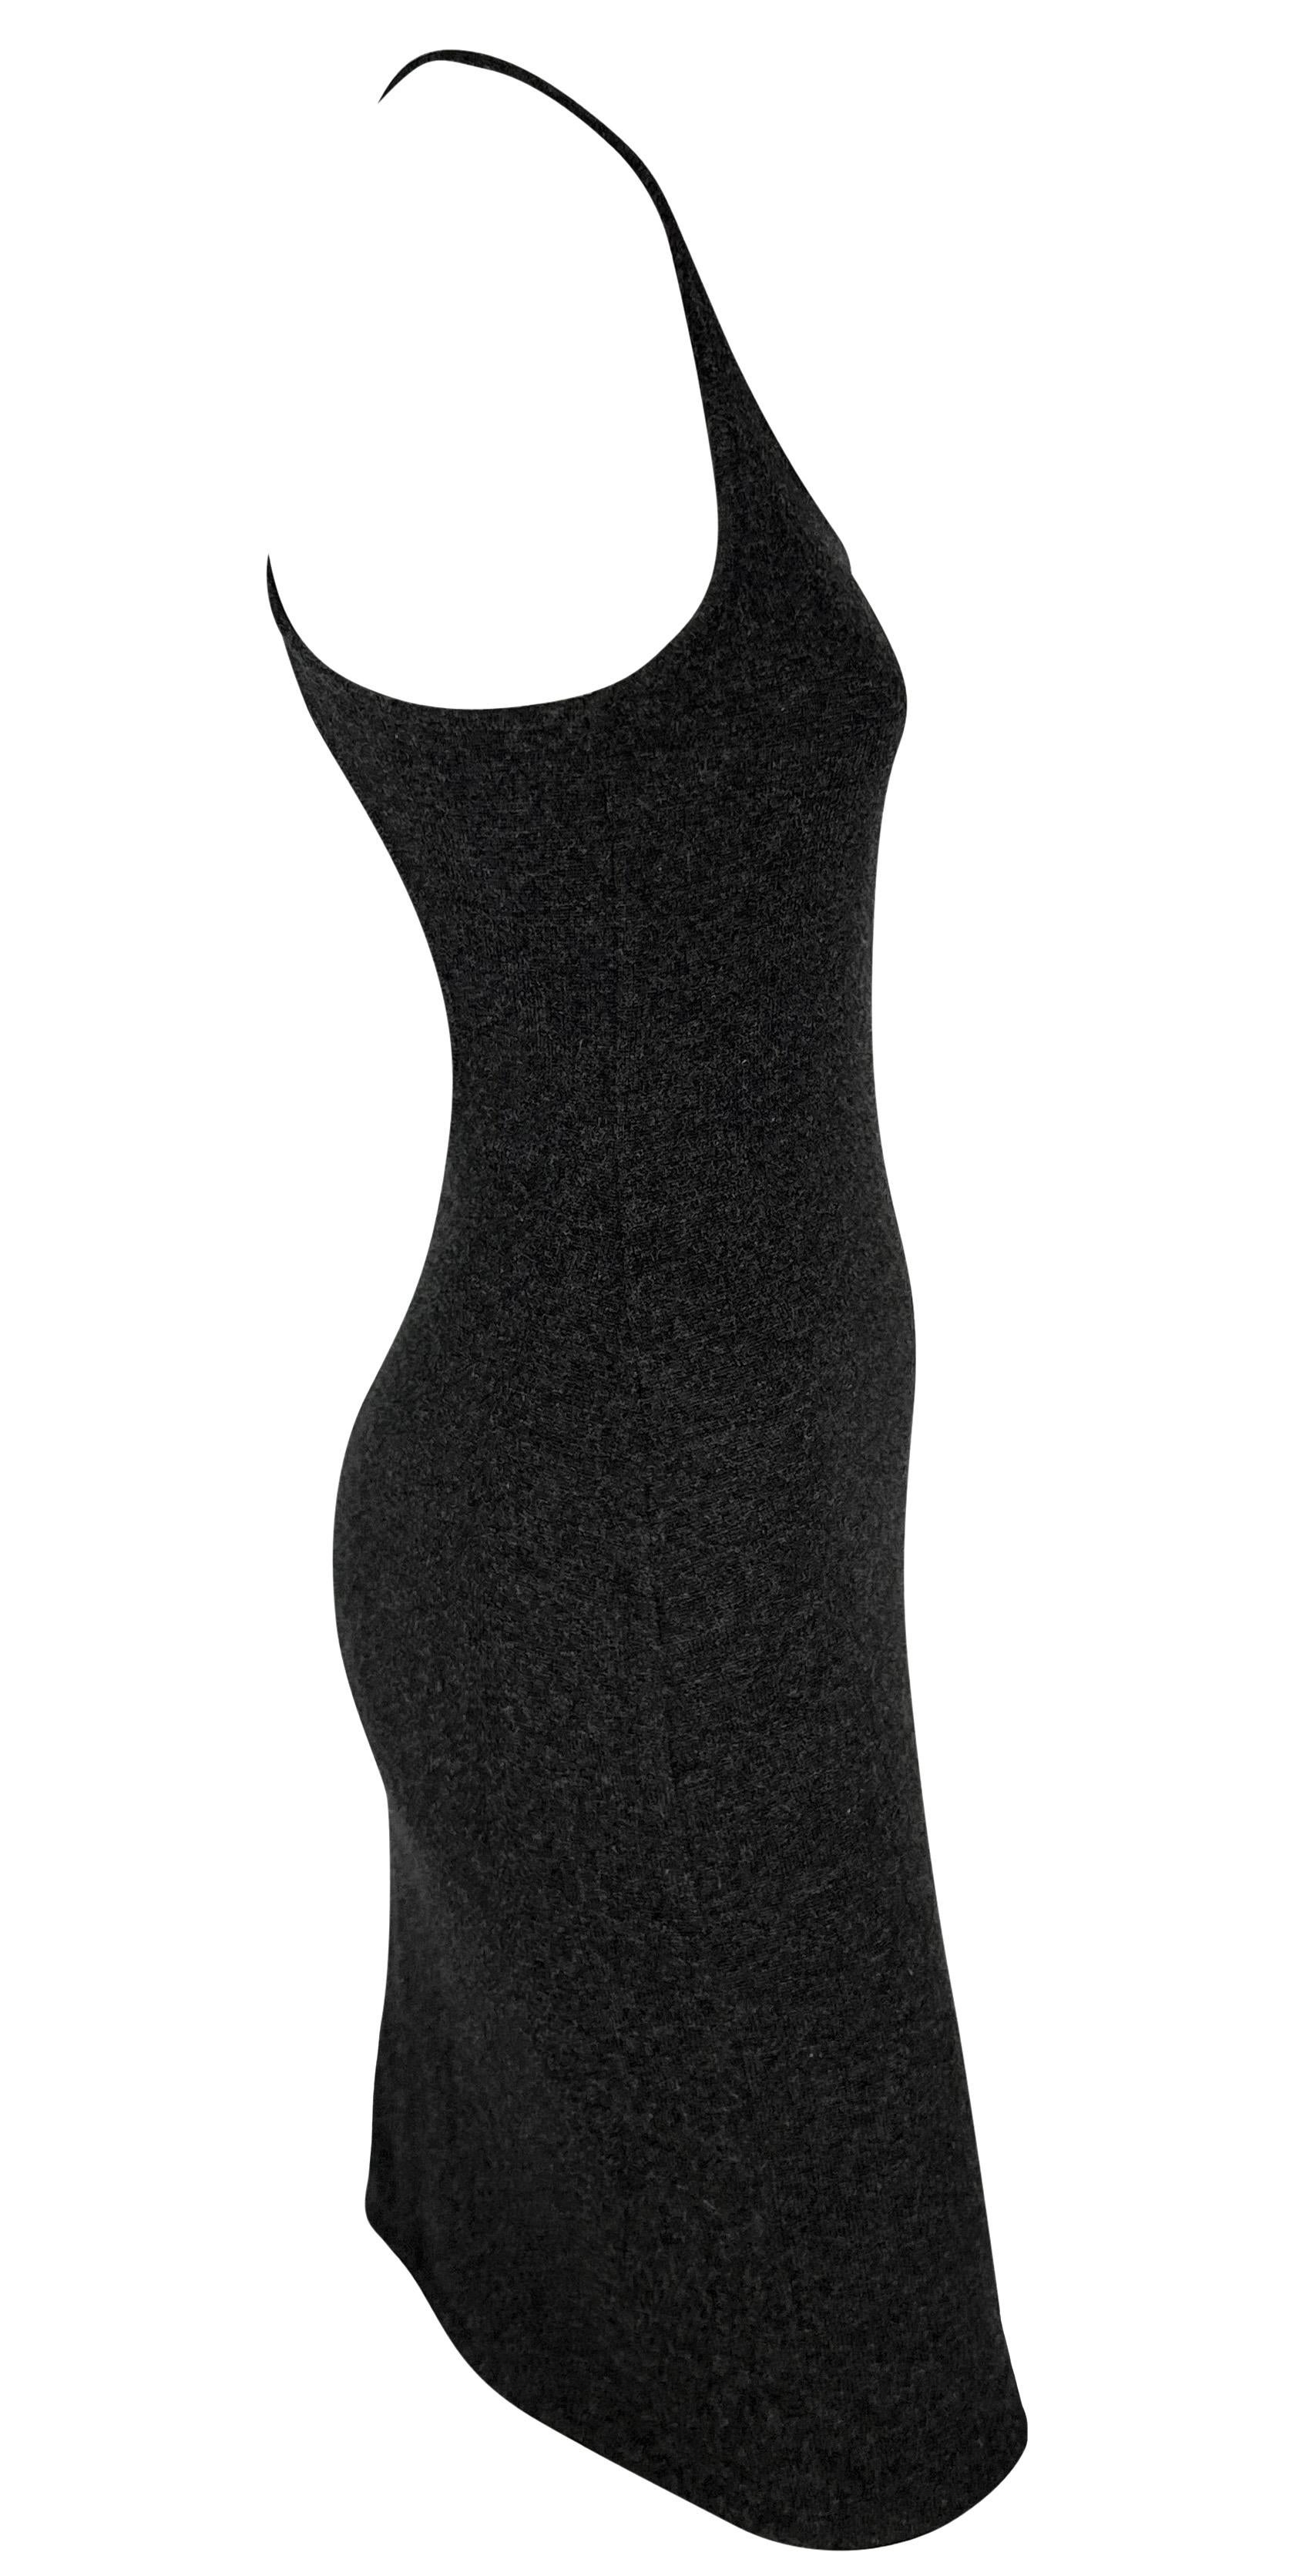 1990s Ralph Lauren Cashmere Knit Backless Charcoal Grey Bodycon Mini Dress In Excellent Condition For Sale In West Hollywood, CA